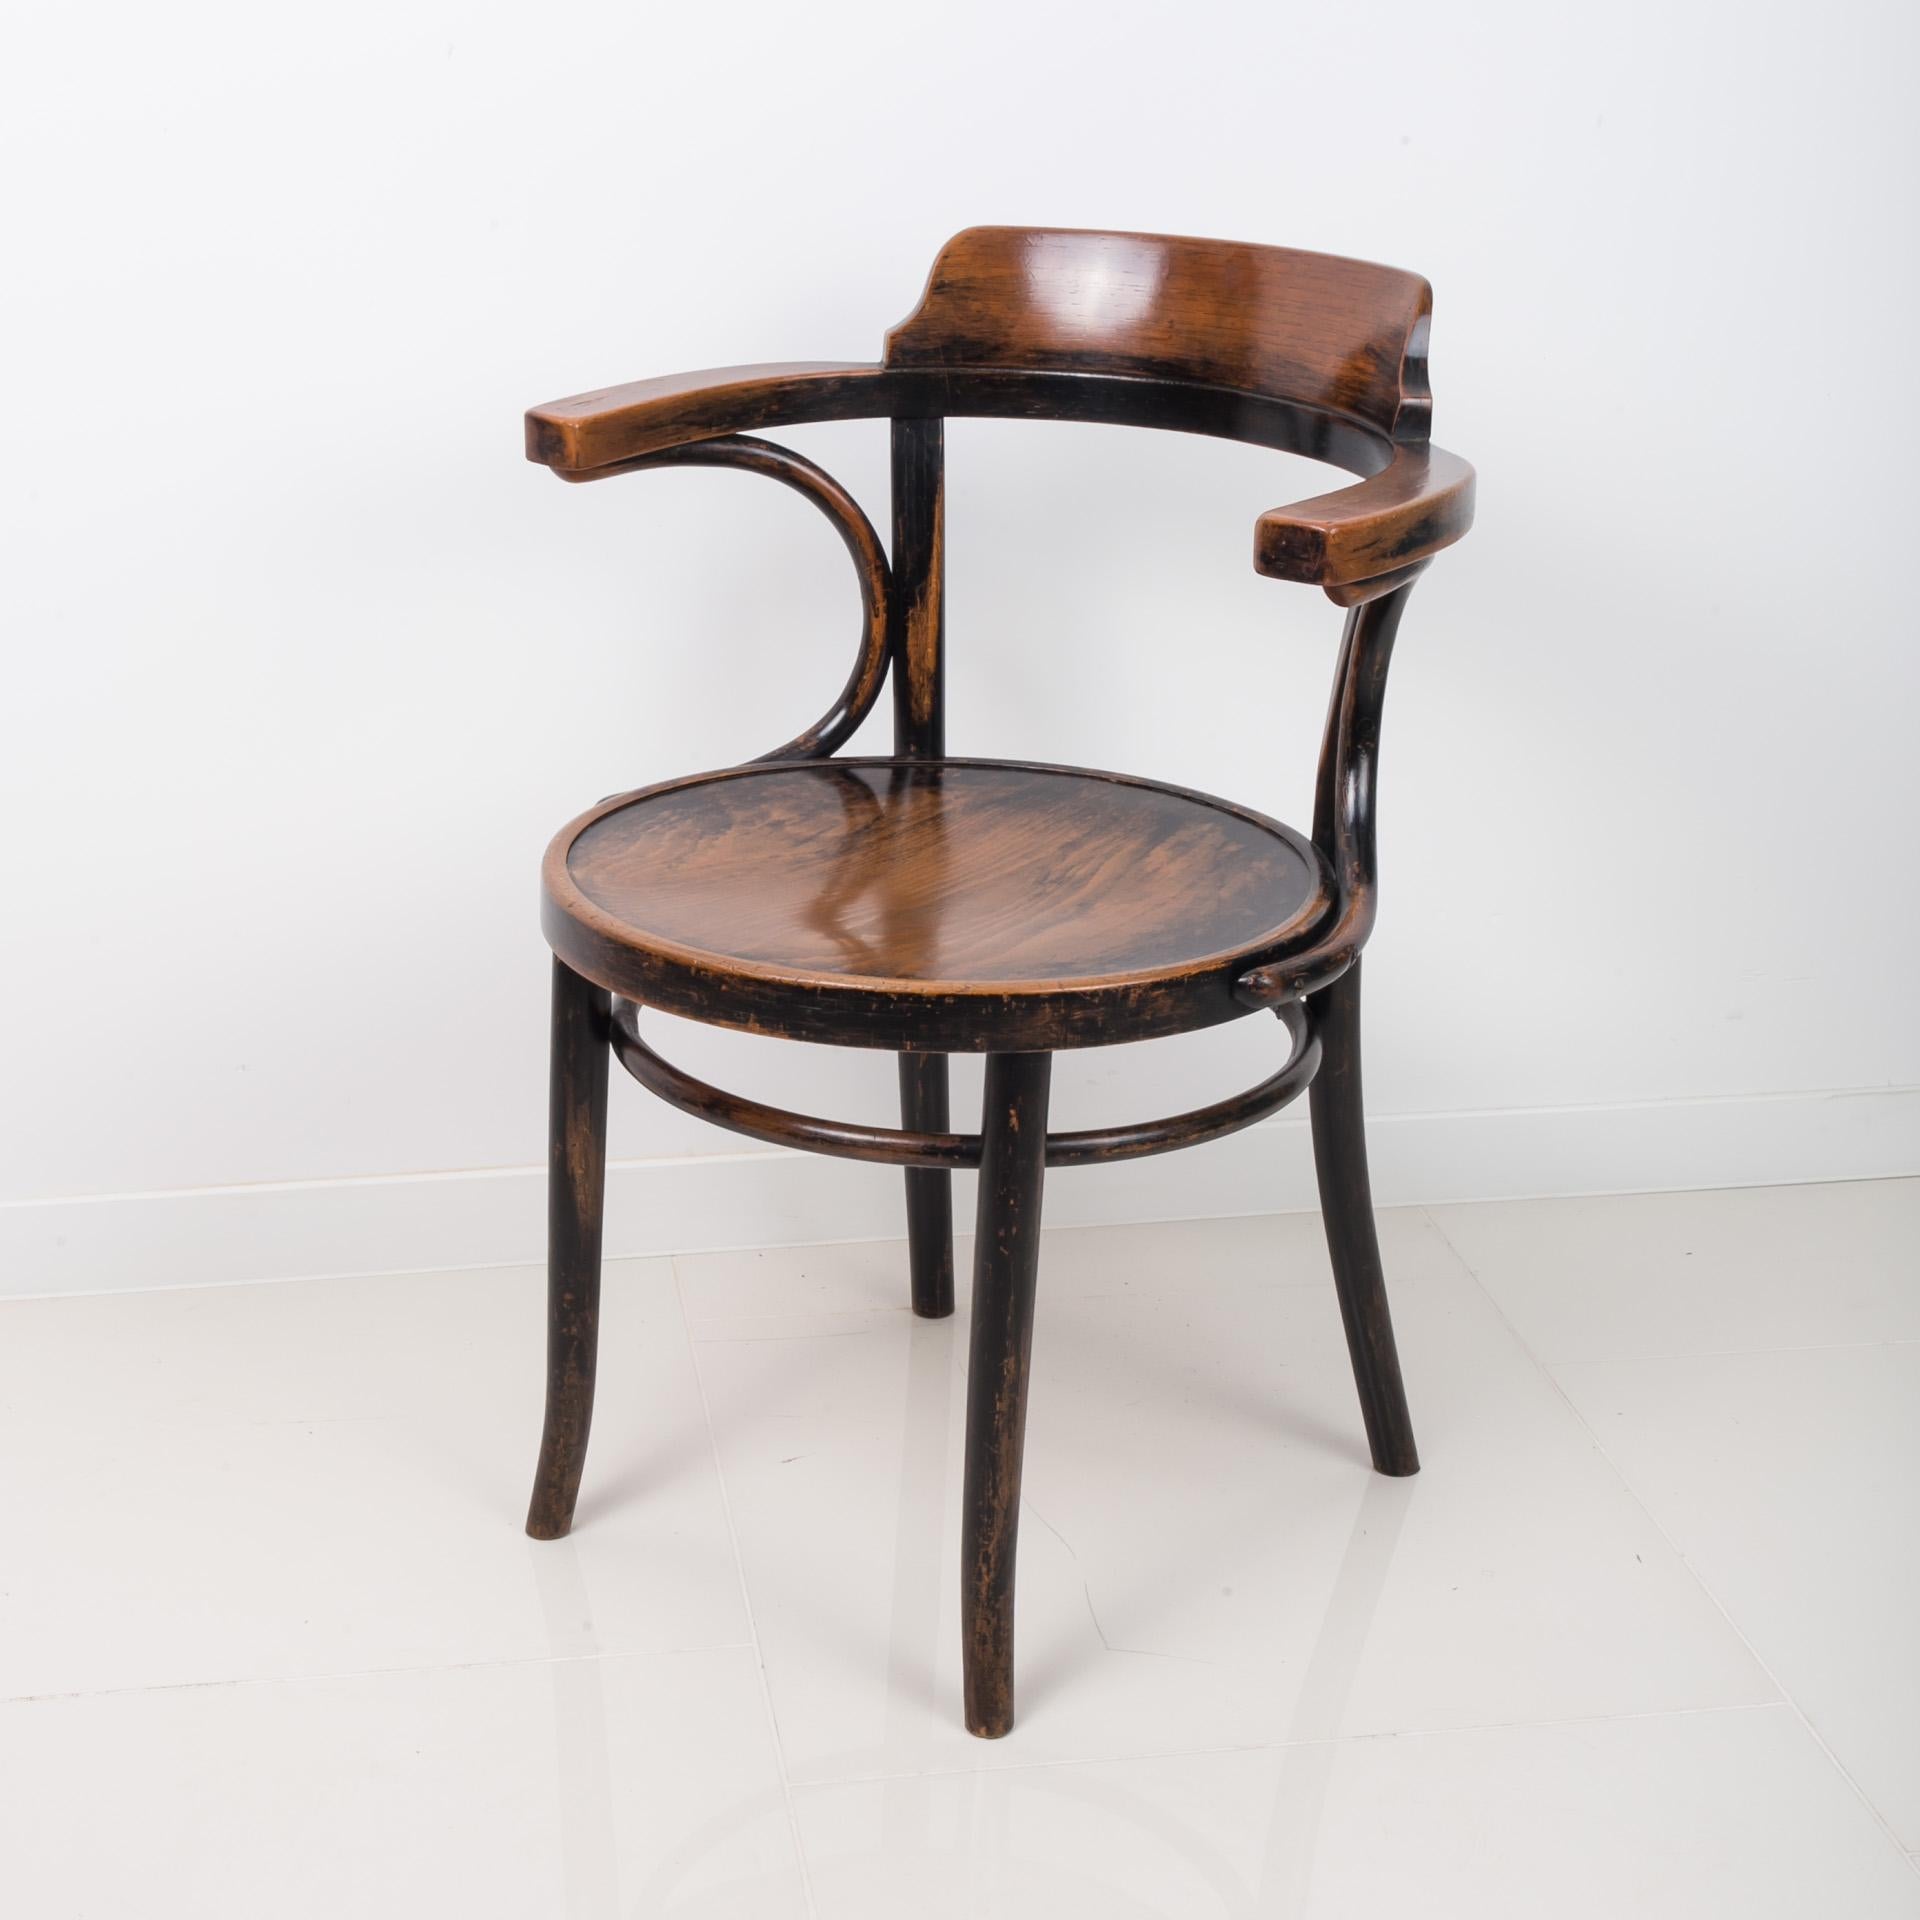 Iconic Thonet Chair Designed by M. Thonet, Bentwood, 1920s 1